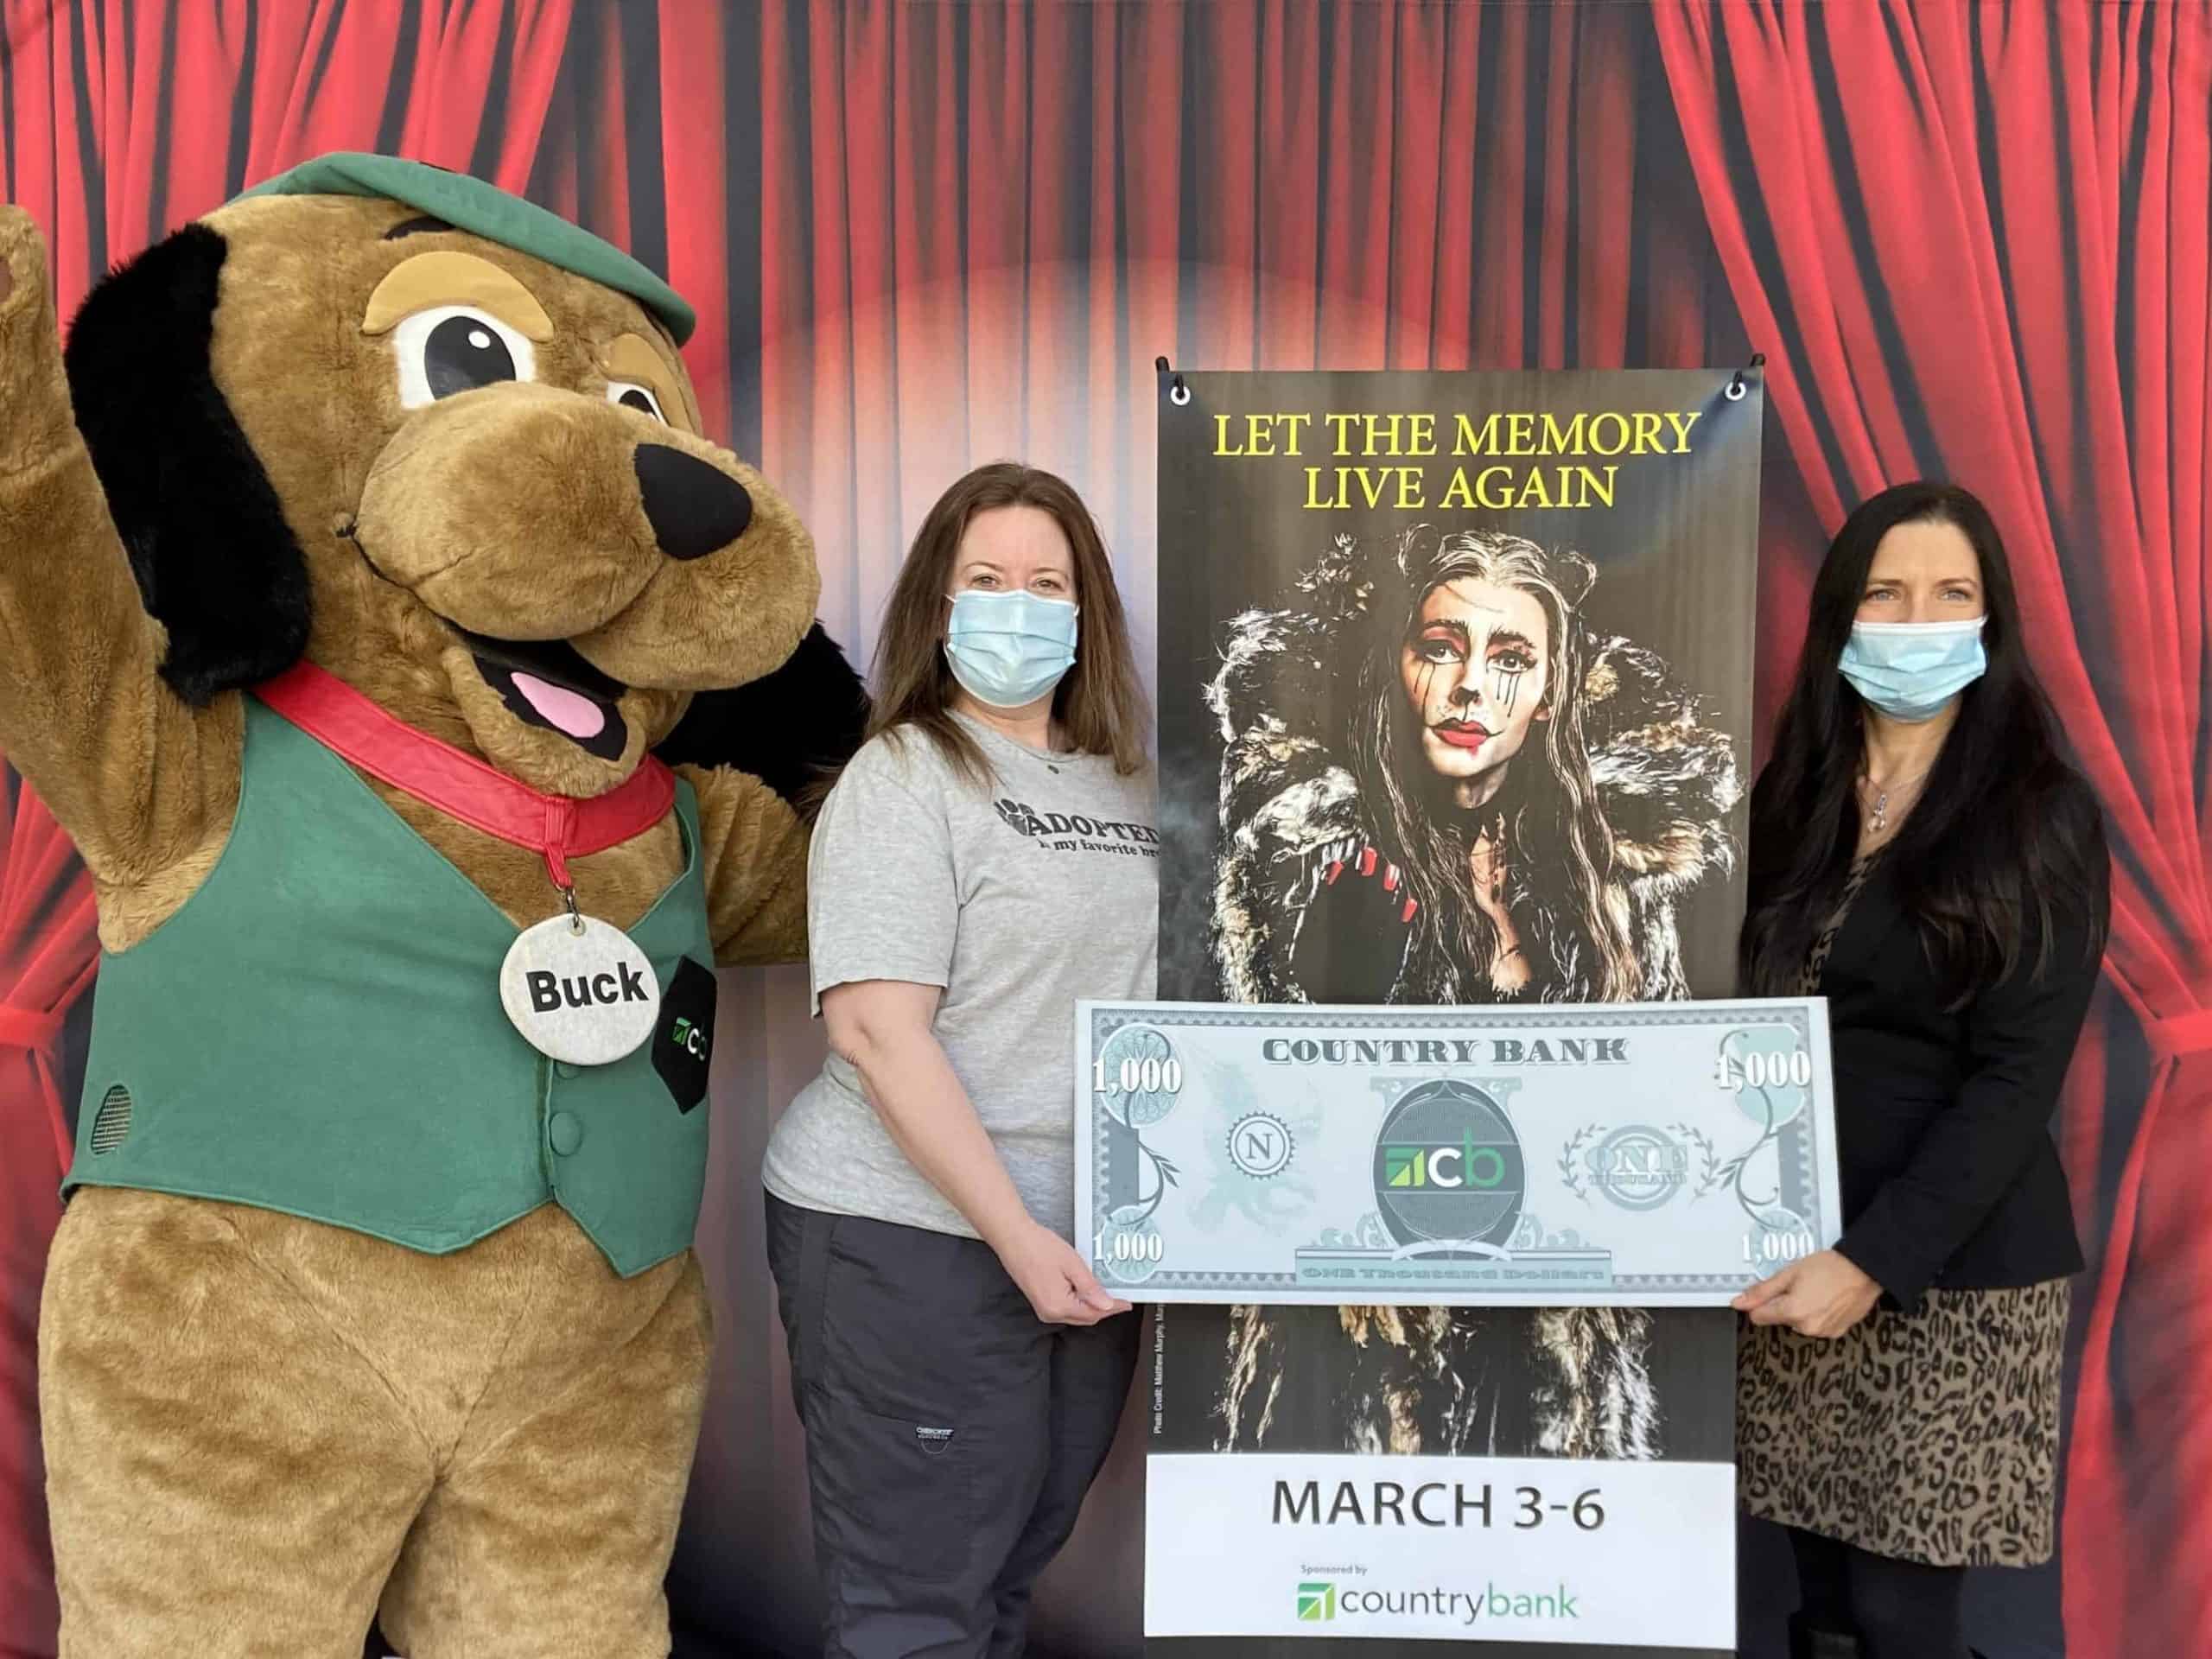 Country Bank's mascot Buck, a big brown dog with a green vest and cap, is standing alongside Kristin Mullins and Jodie Gerulaitis. Kristin and Jodie are holding a Country Bank  alt=